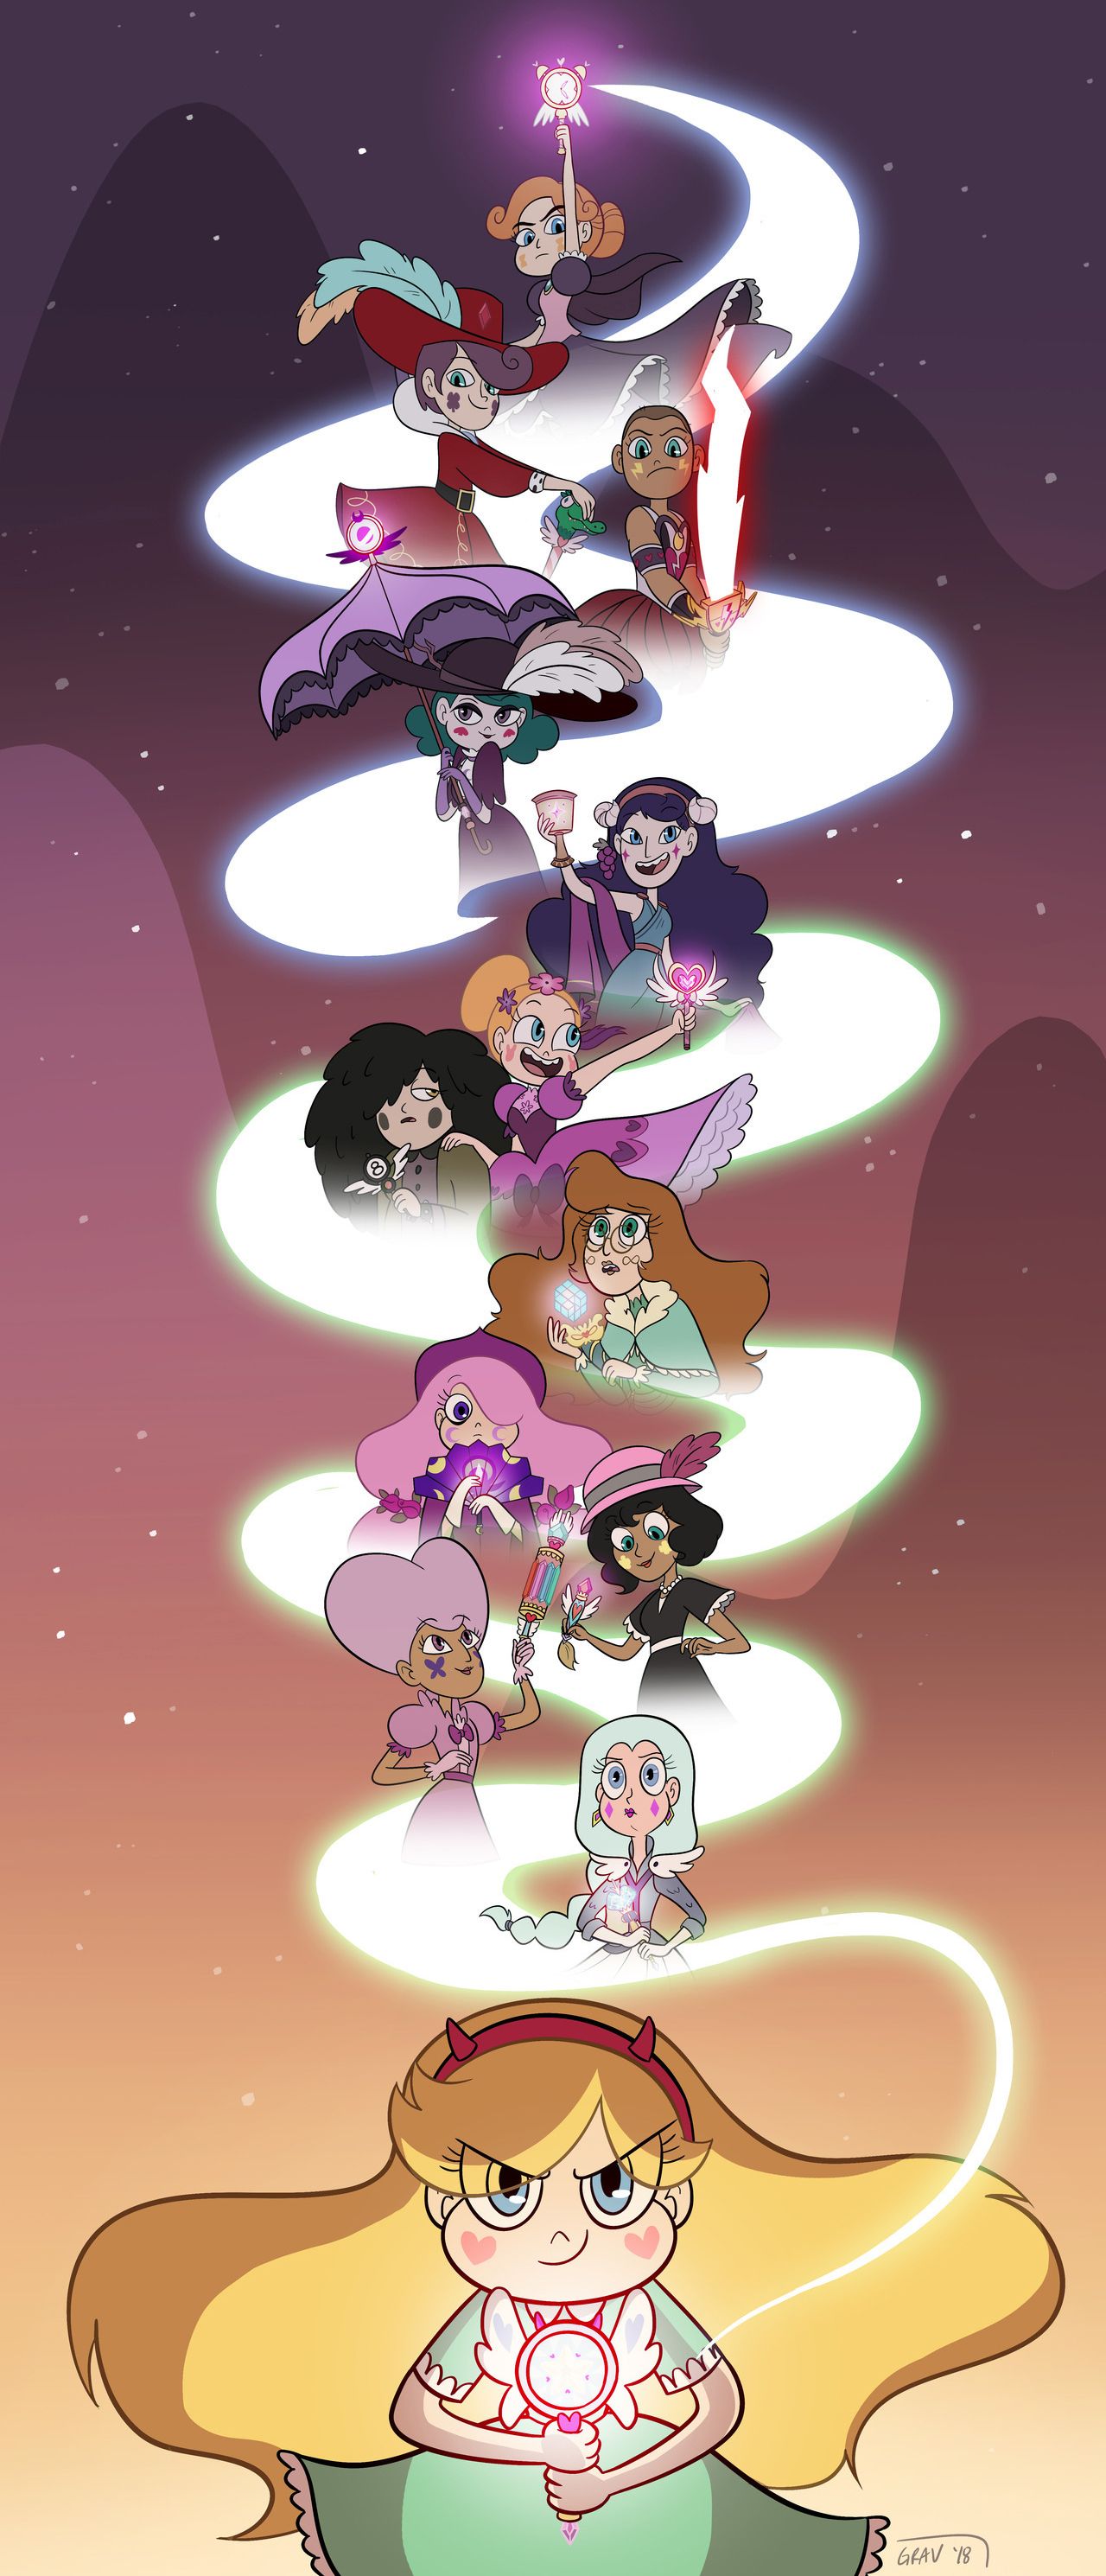 Star Vs. The Forces Of Evil Wallpapers